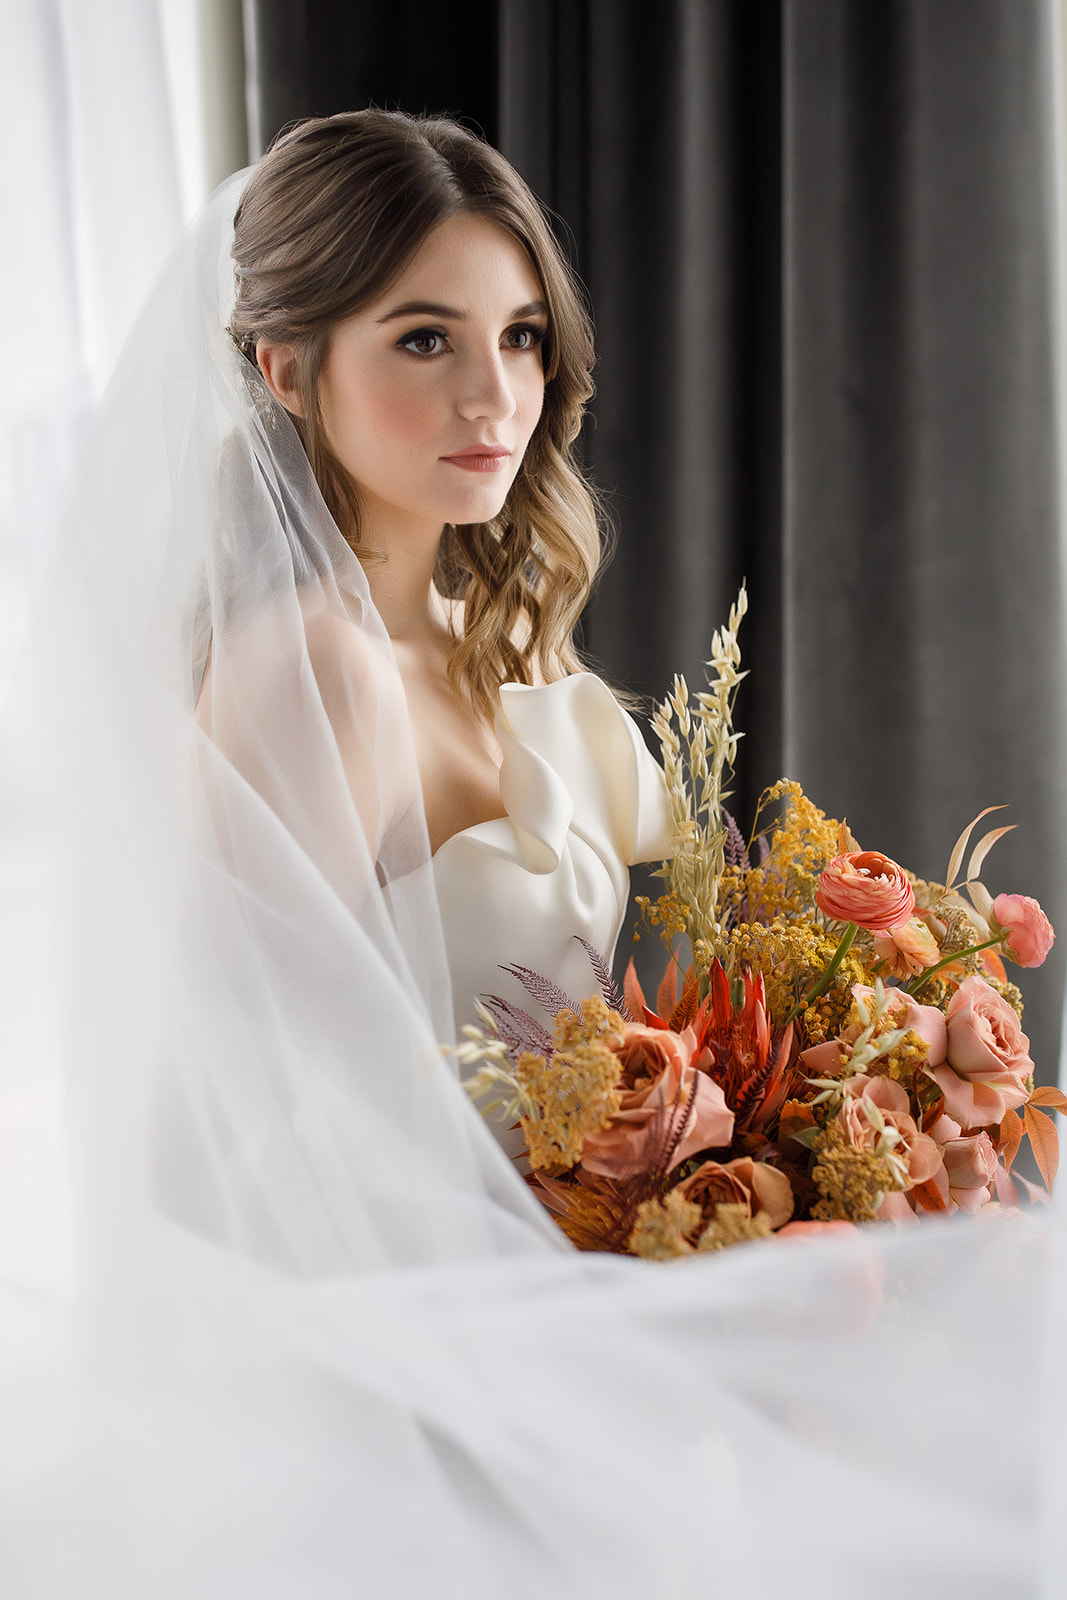 Meet Perfect Day Beauty featured on Nashville Bride Guide